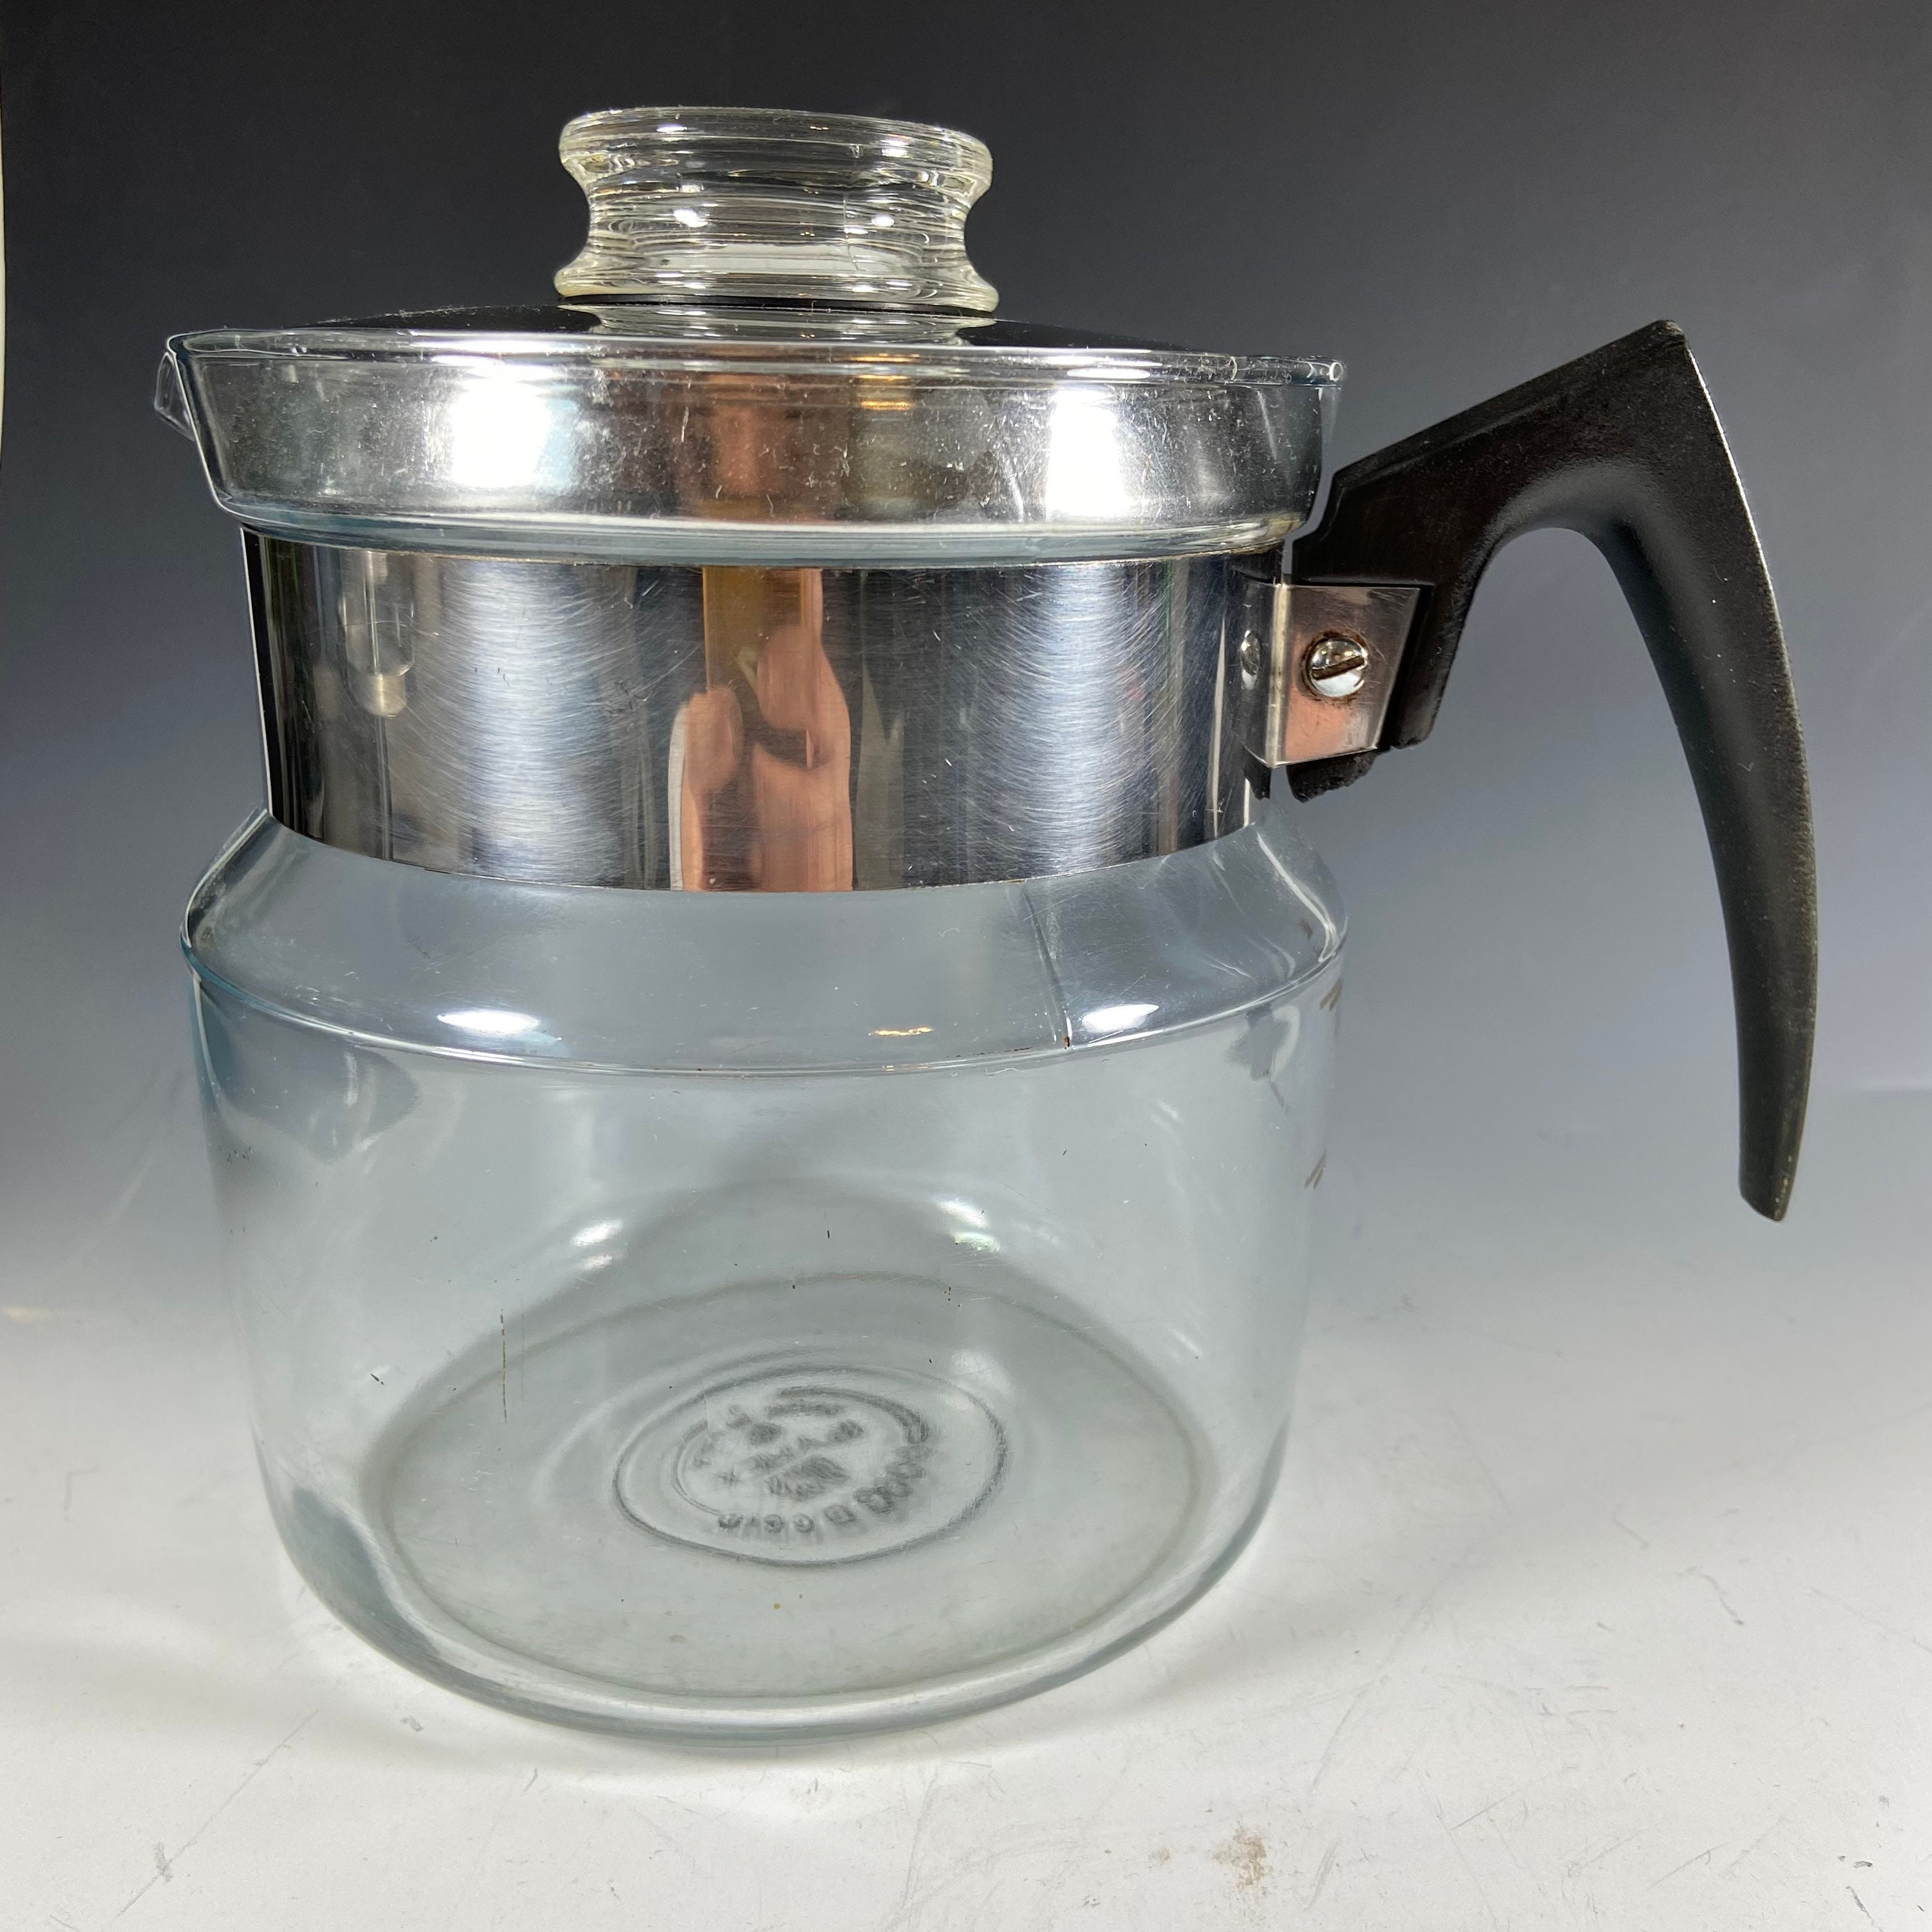 Pyrex Flameware 4 Cup Glass Milk Warmer Insert RARE [7754 4 cup milk  warmer] - $59.95 : Classic Kitchens And More, Authentic Retro Kitchenware